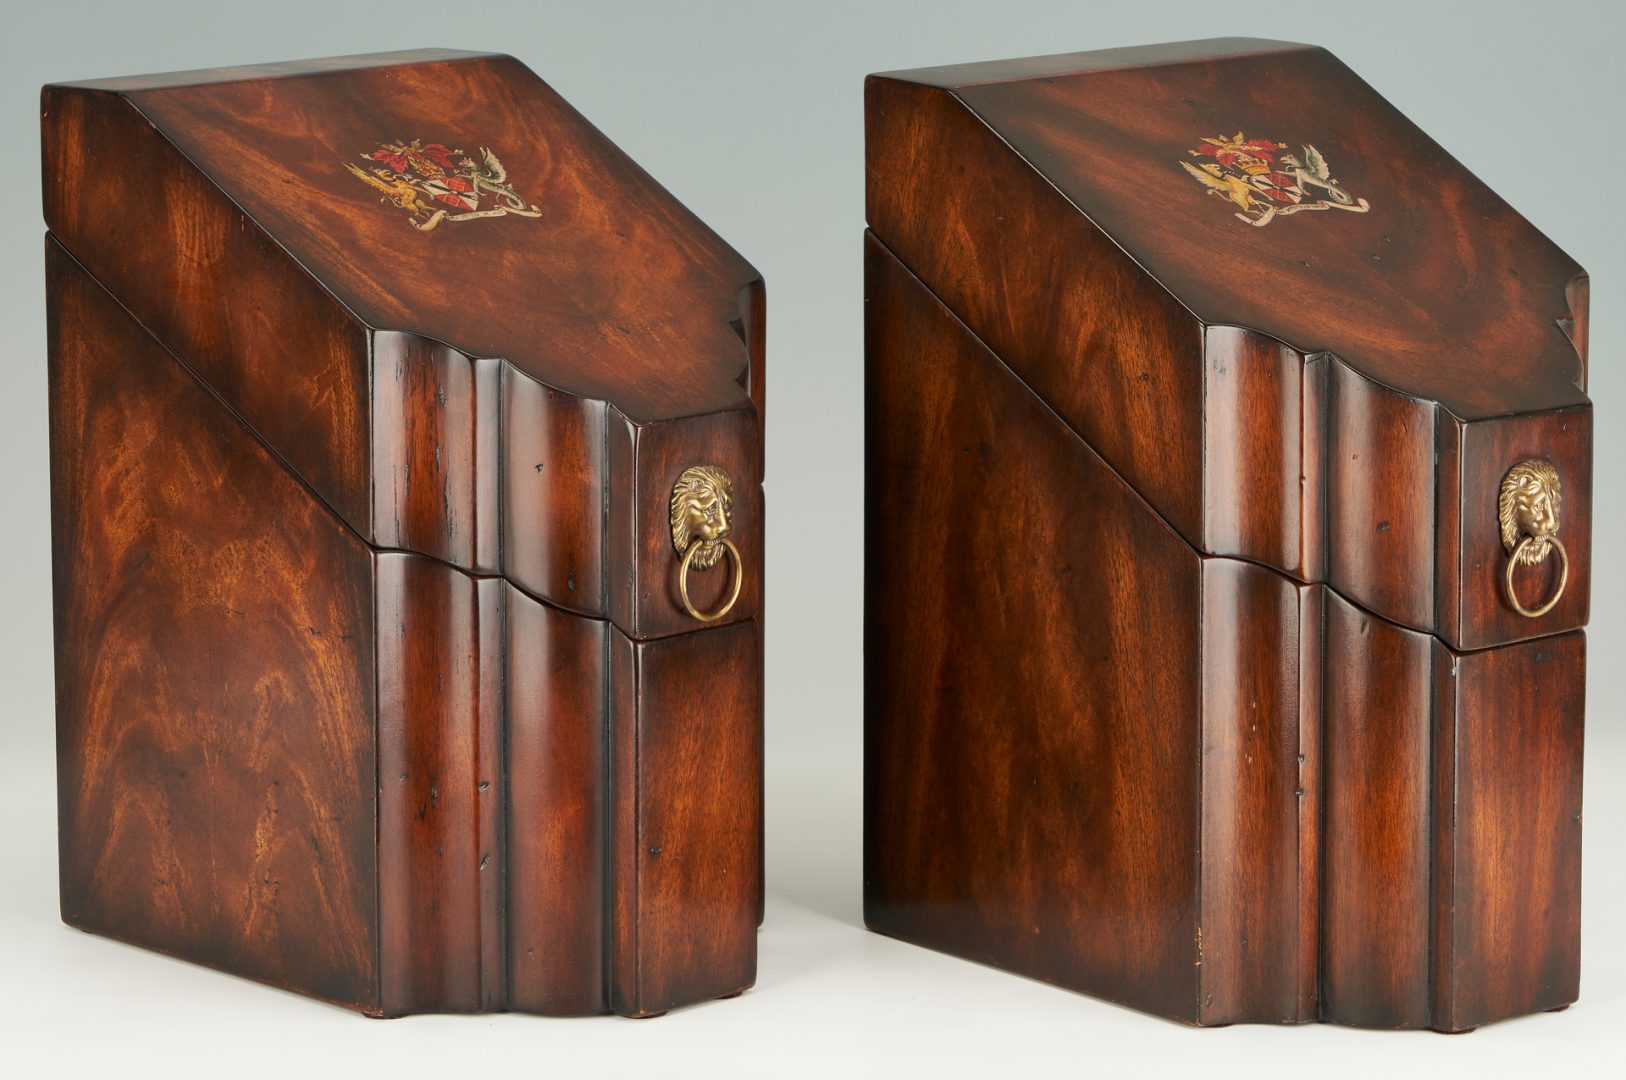 Lot 445: Pair Theodore Alexander Althorp Reproduction Knife Boxes